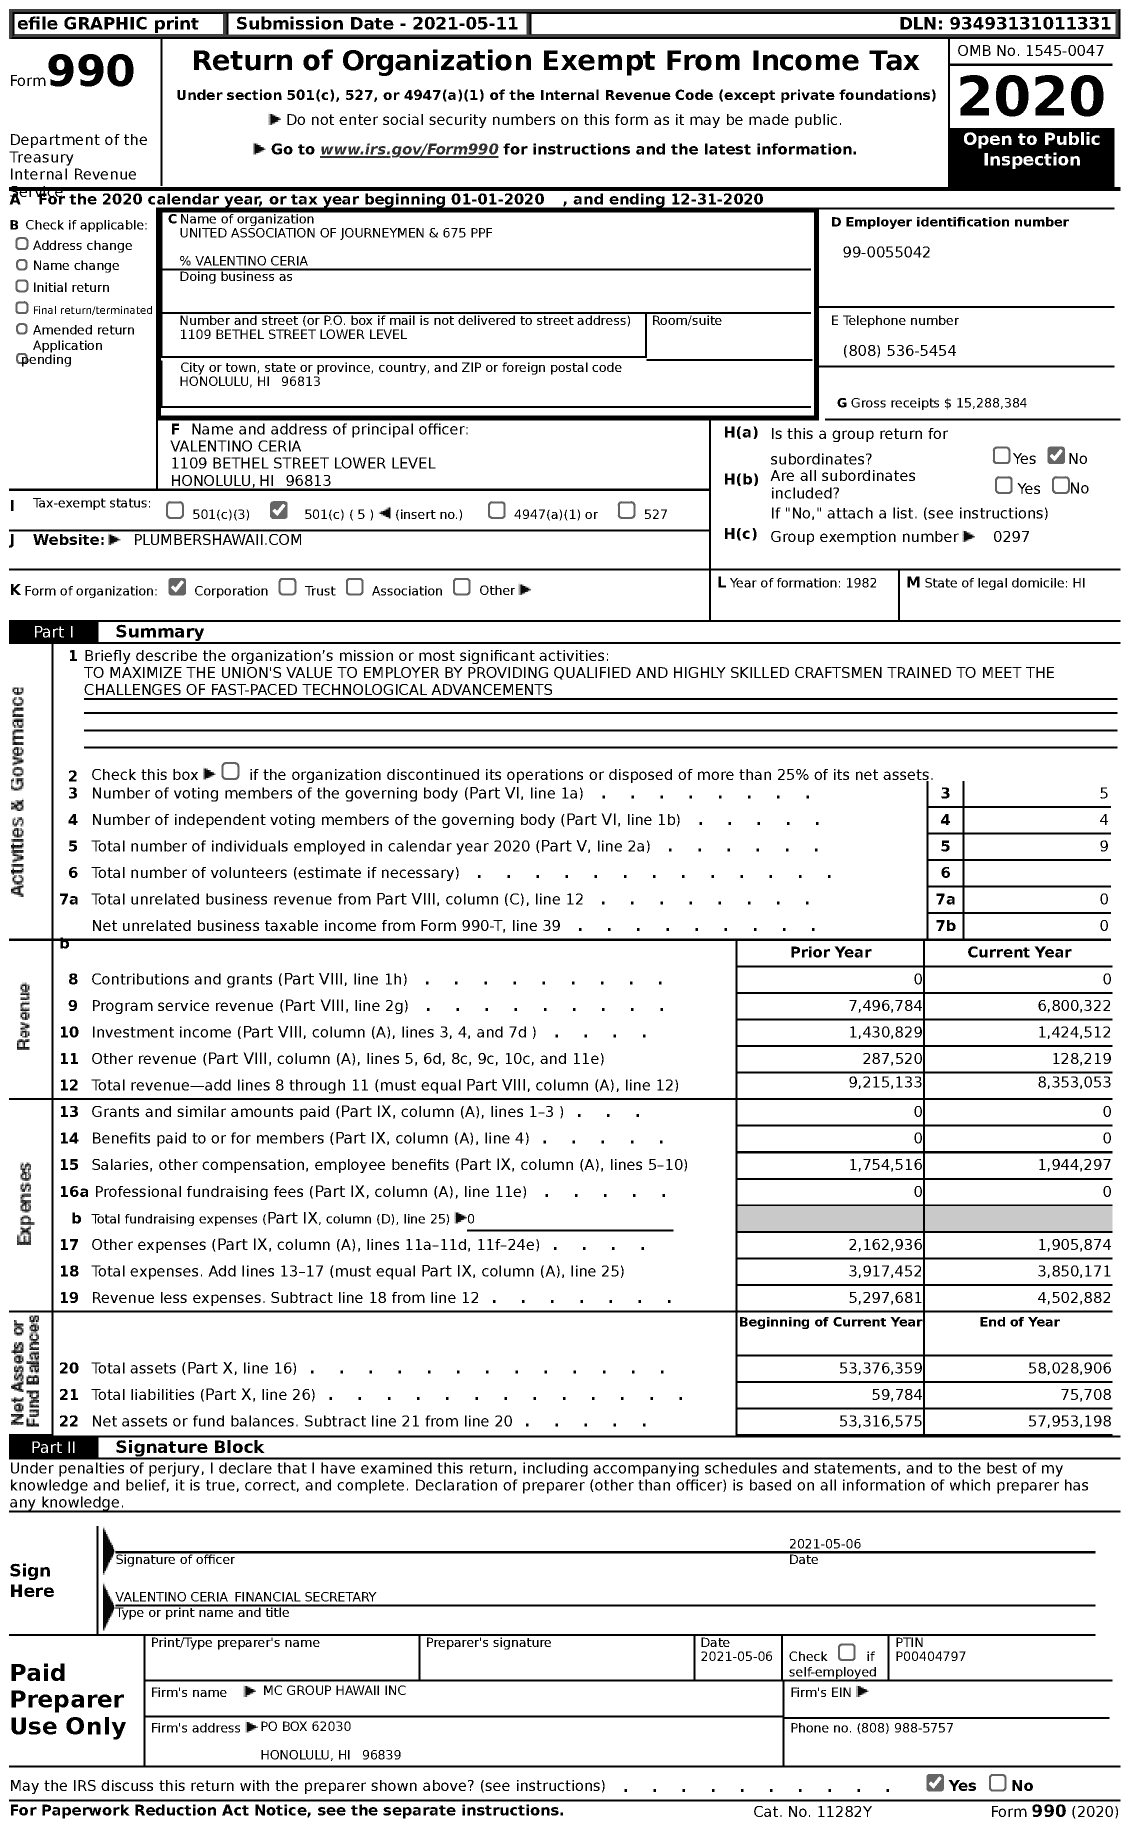 Image of first page of 2020 Form 990 for United Association of Journeymen and 675 PPF